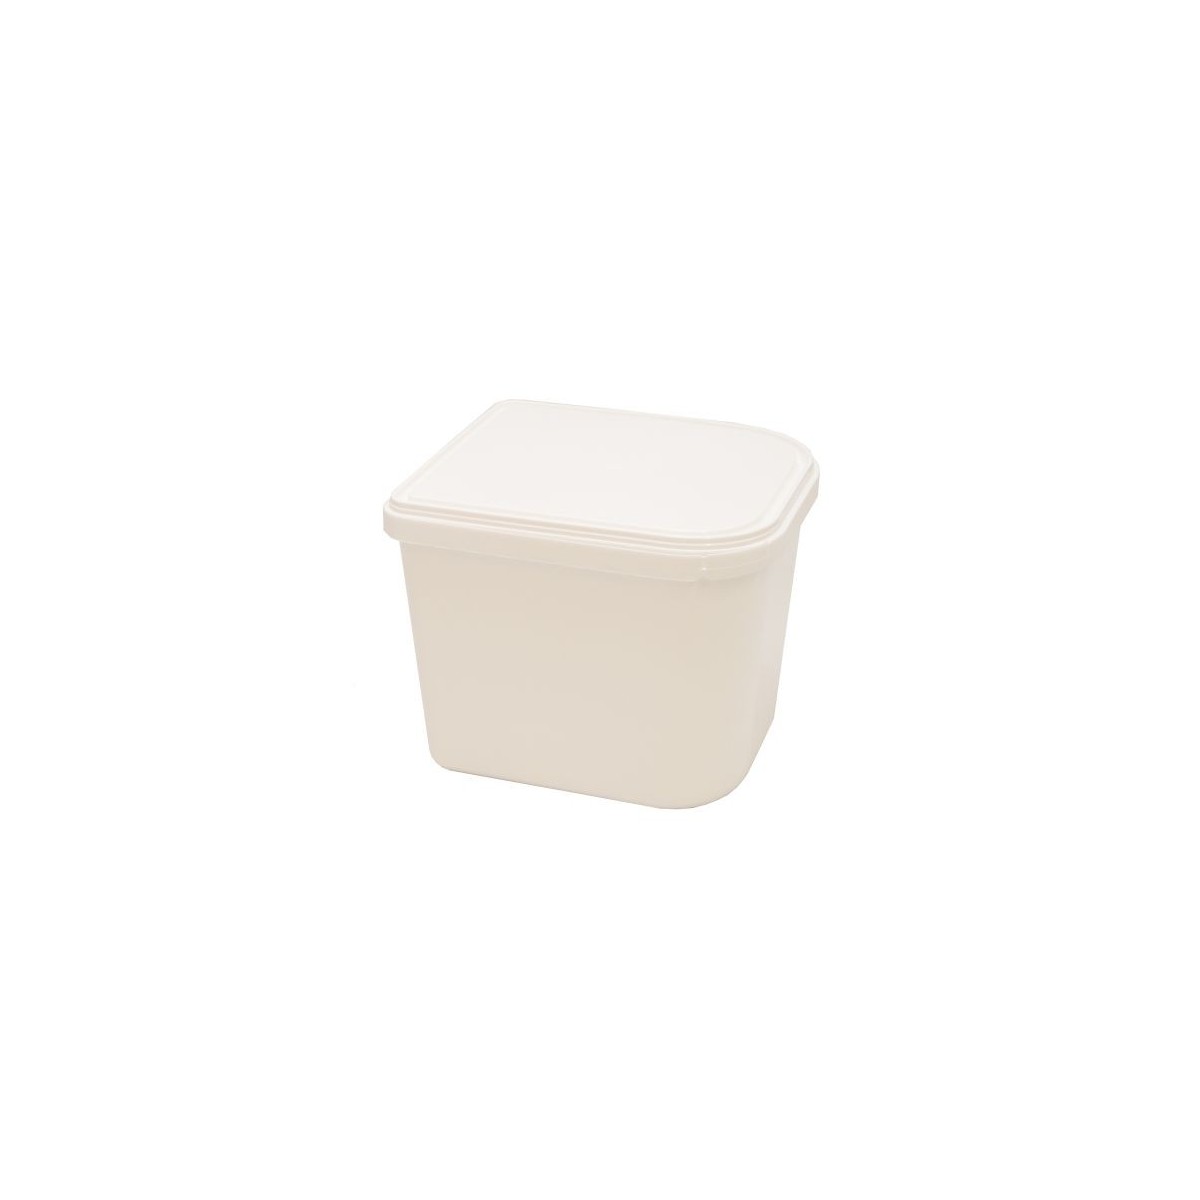 PLASTIC ICE CREAM BOX CADY 2,5L WITHOUT LID 168 PIECES FOST+2020 INCLUDED 9,10336€  BOX